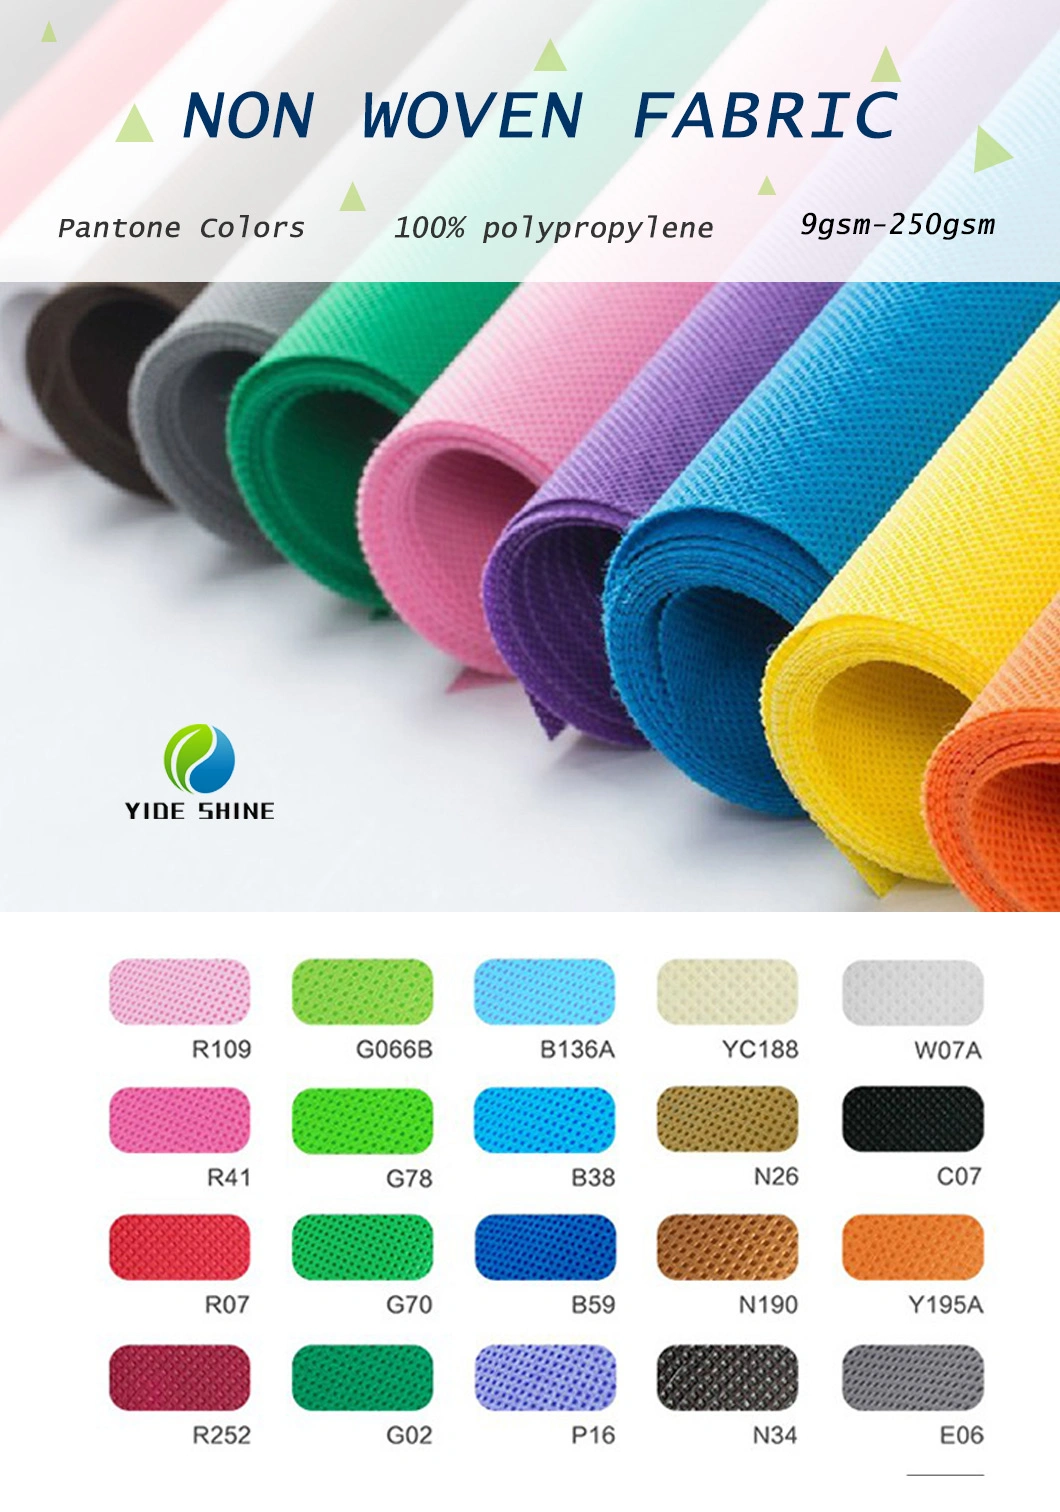 PP Polypropylene Spunbond Nonwoven Fabric TNT Rolls for Packaging Medical Agricultural Industrial & Home Non Woven Fabric